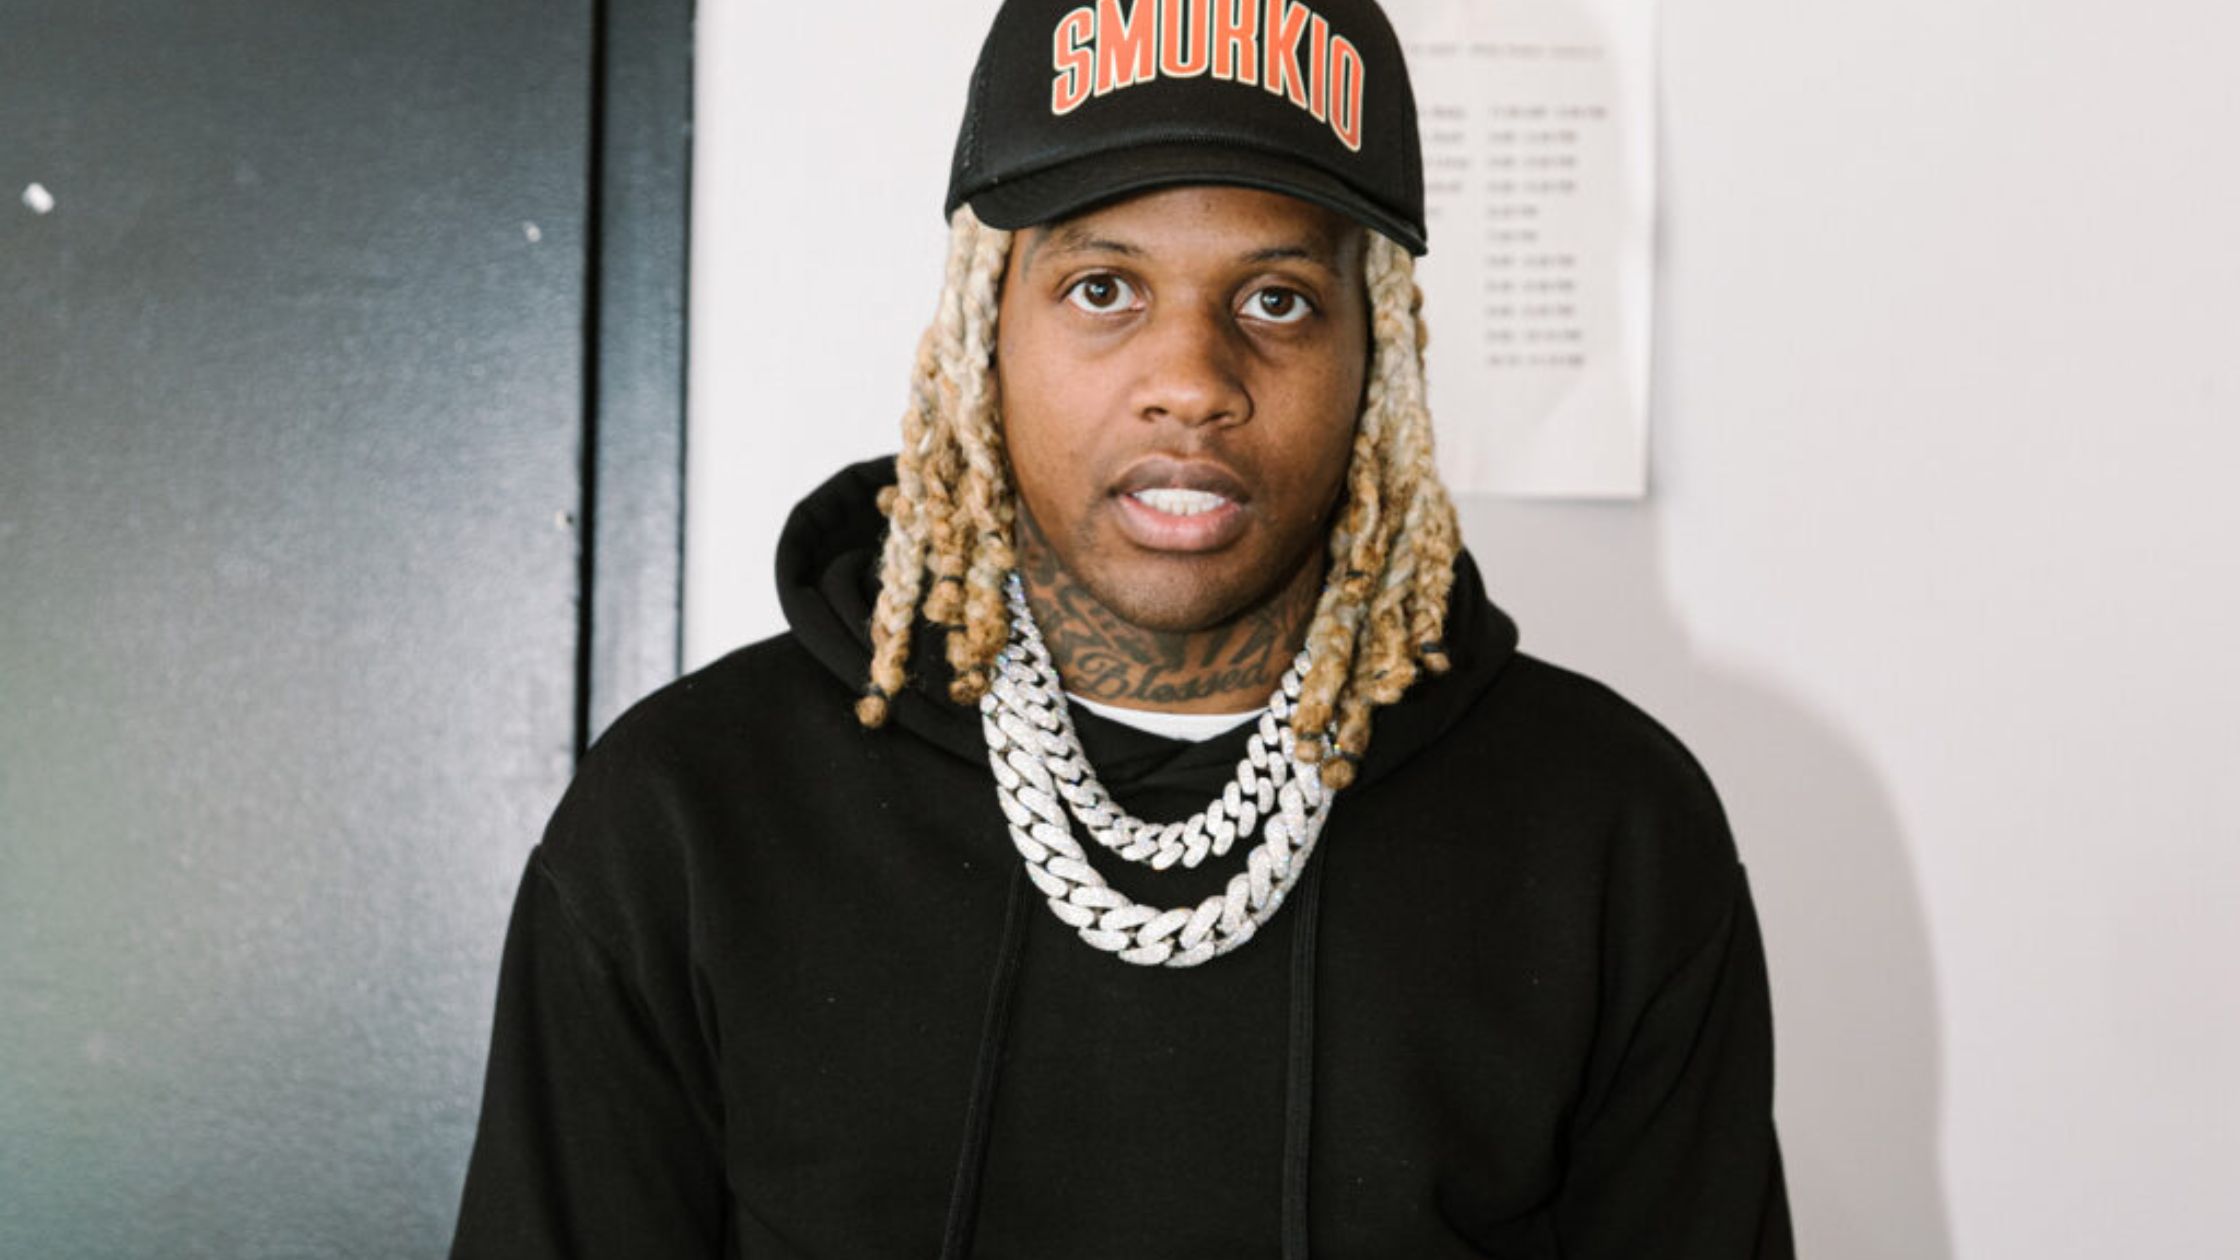 Lil Durk’s Net Worth, Biography, Age, Height, Family, Career